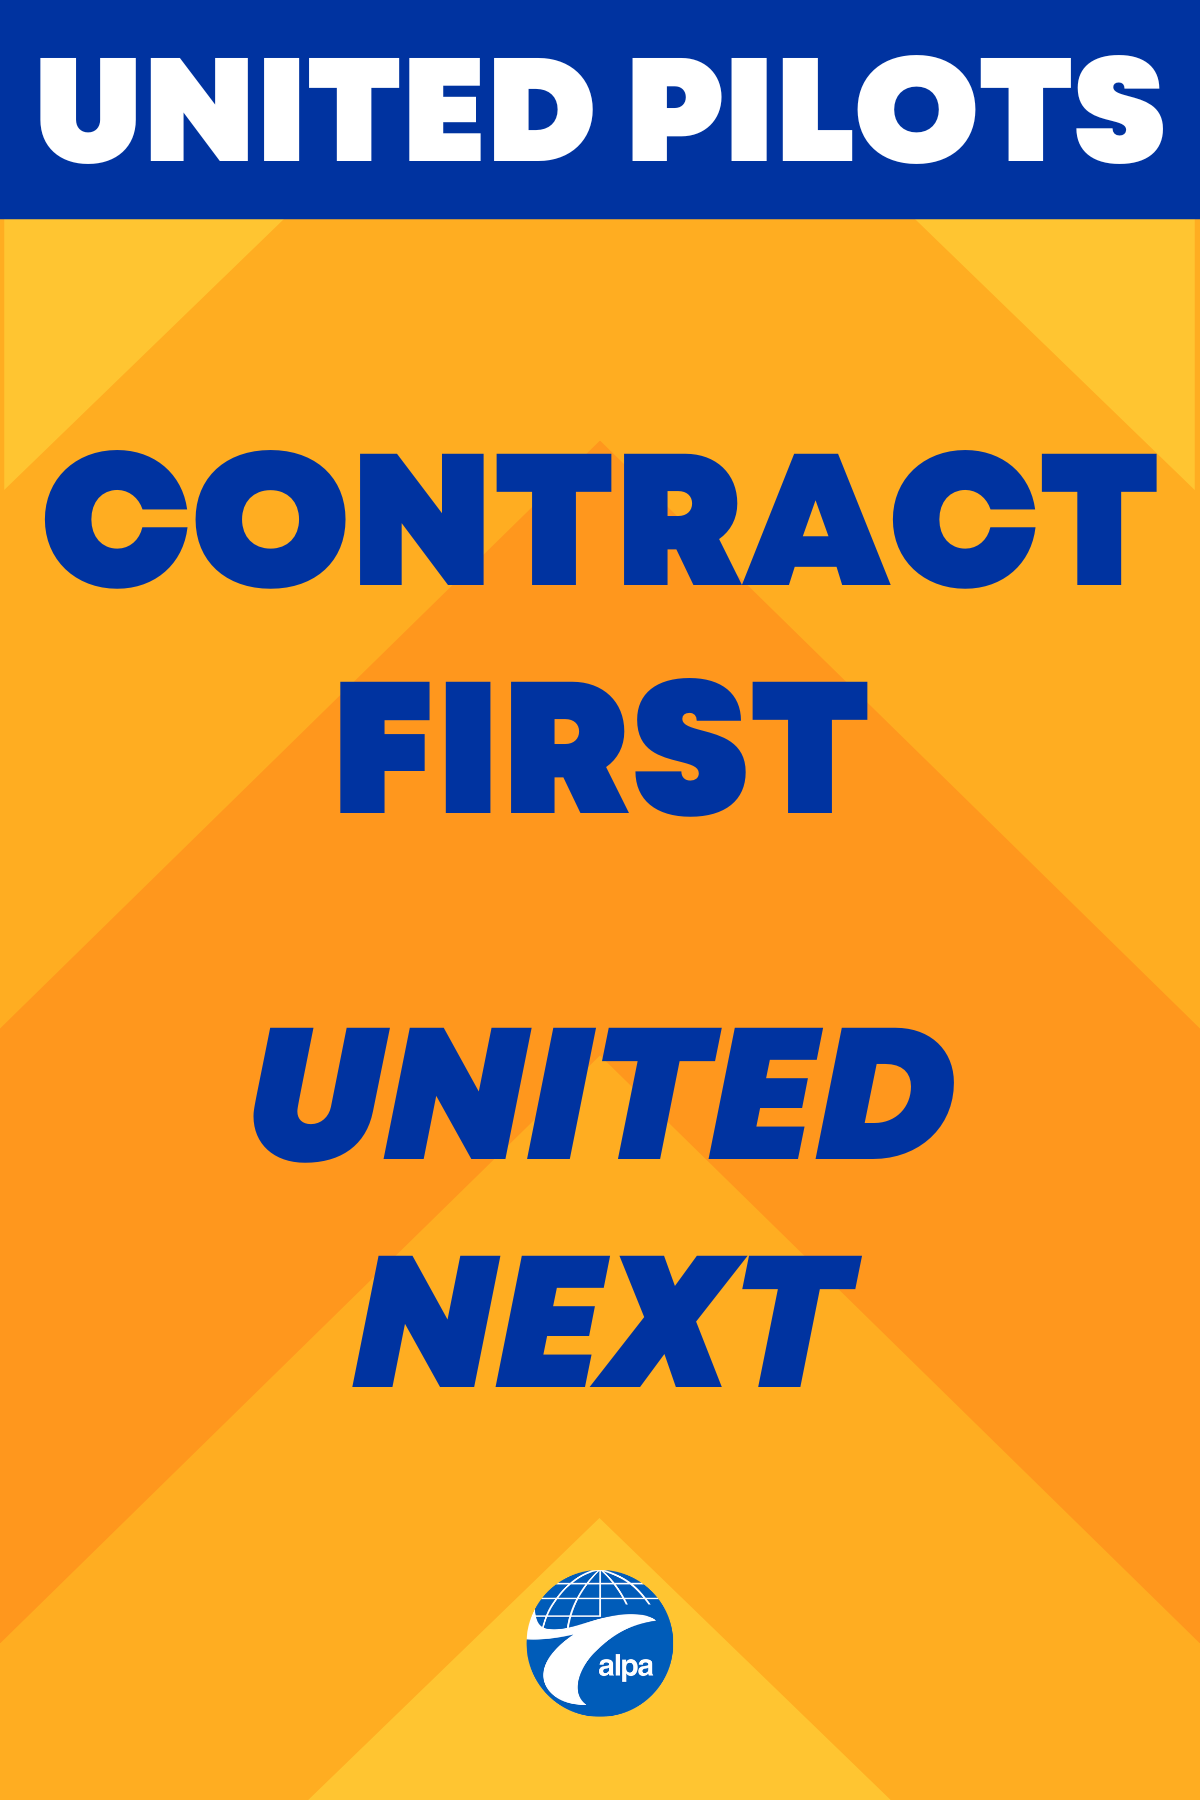 Contract First United Next picket sign image